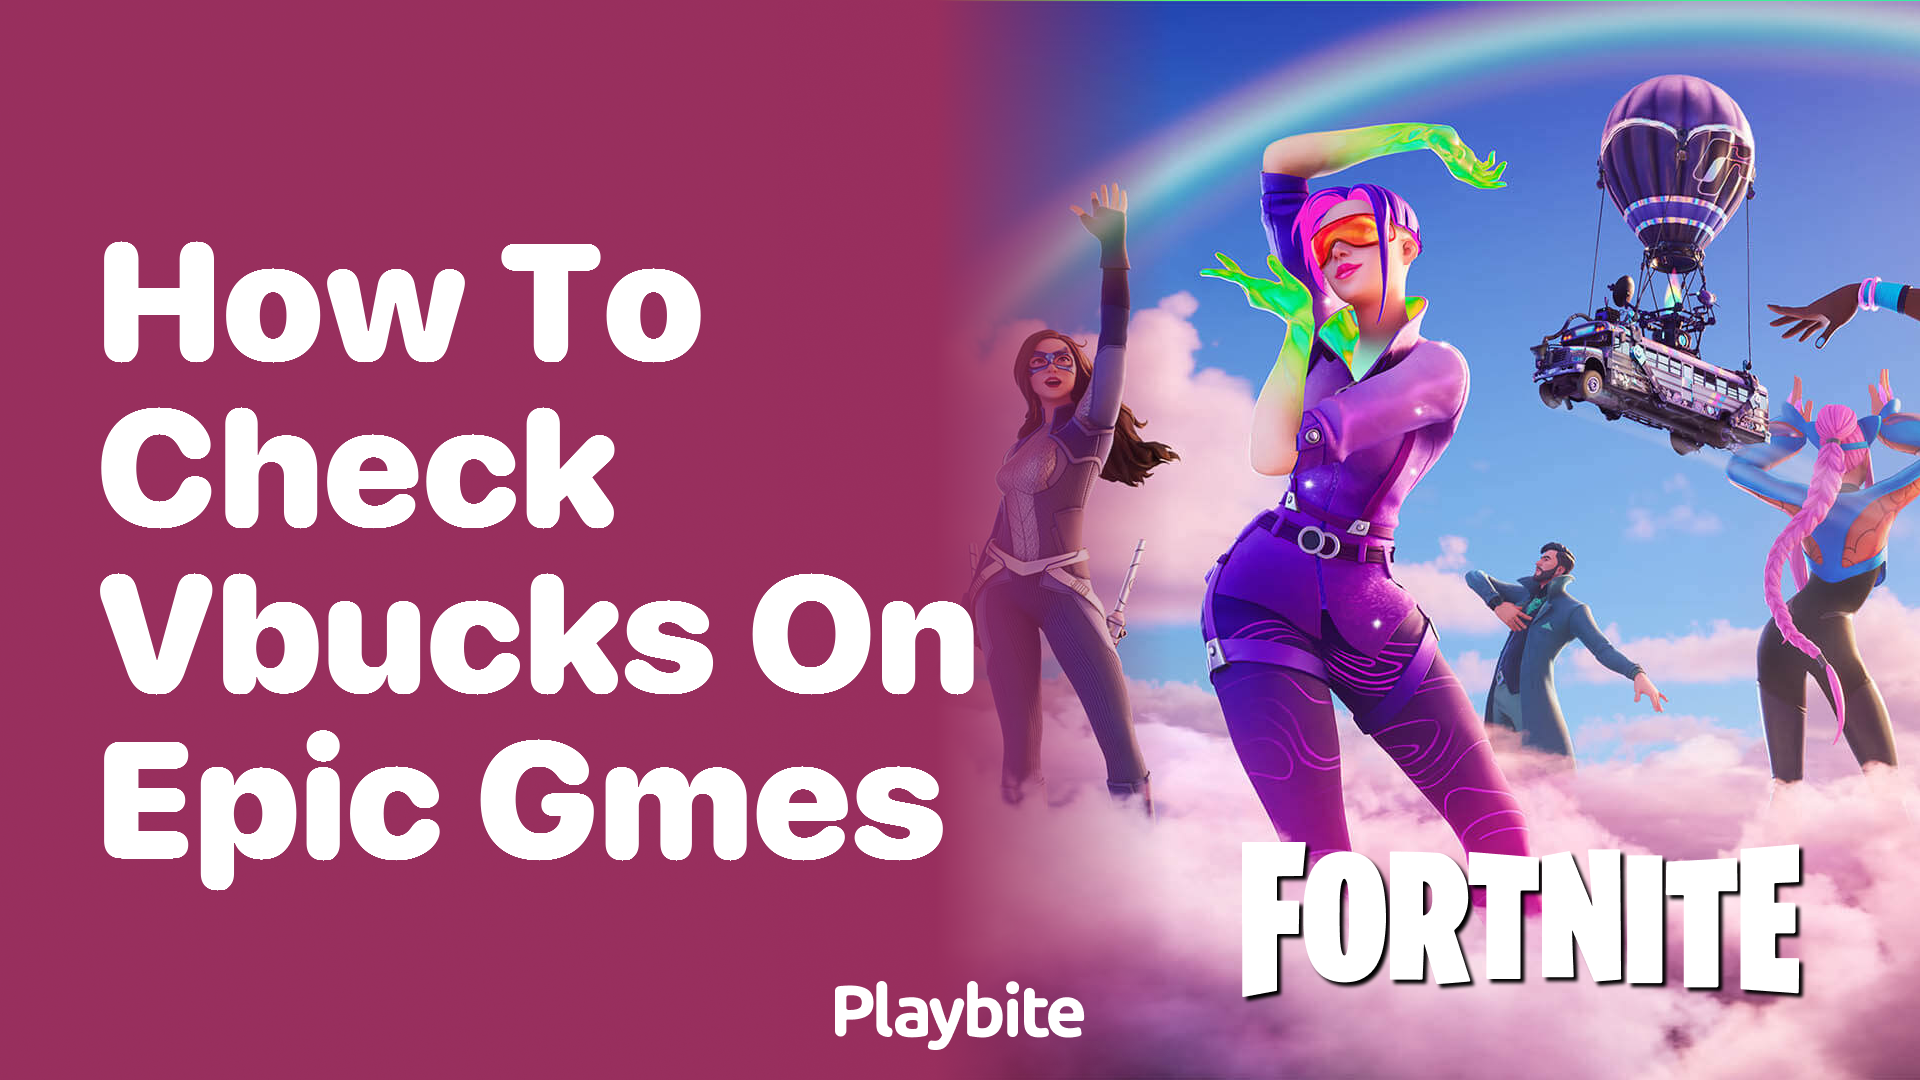 How to Check V-Bucks on Epic Games: A Quick Guide